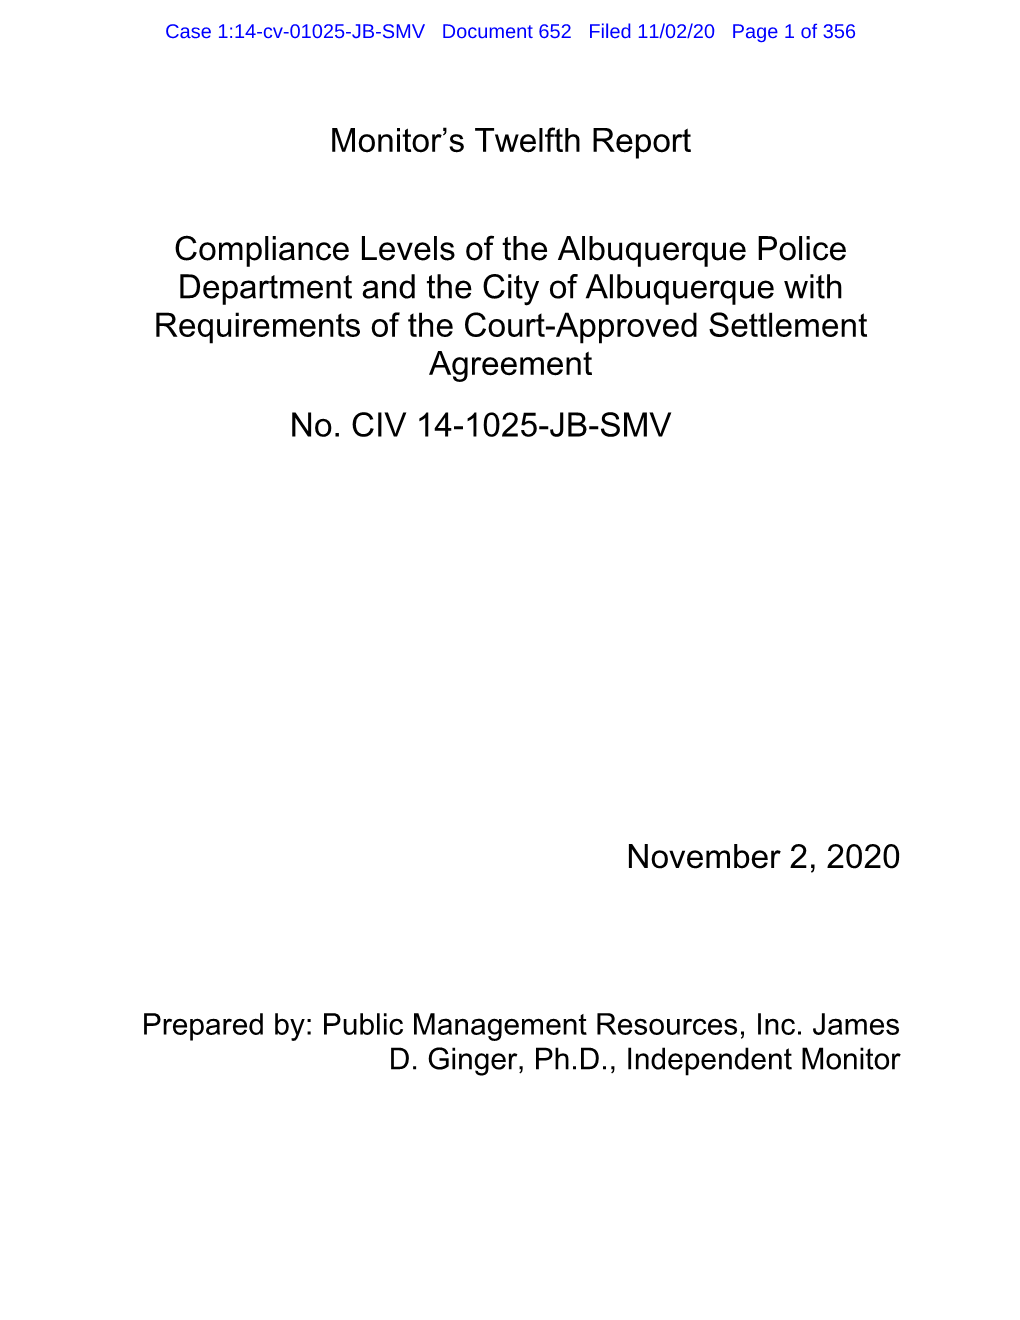 Monitor's Twelfth Report Compliance Levels of the Albuquerque Police